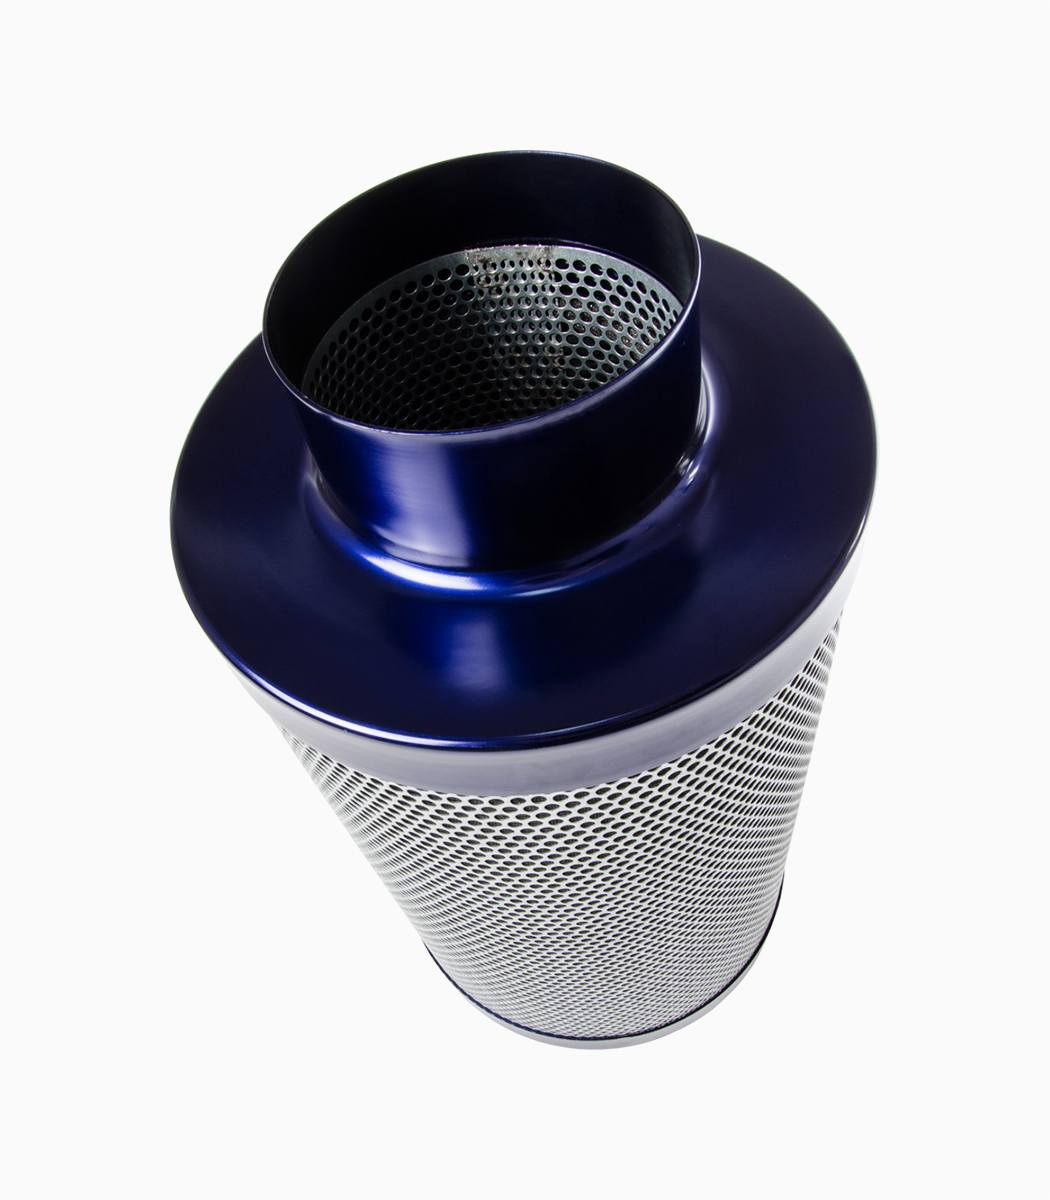 charcoal carbon filter